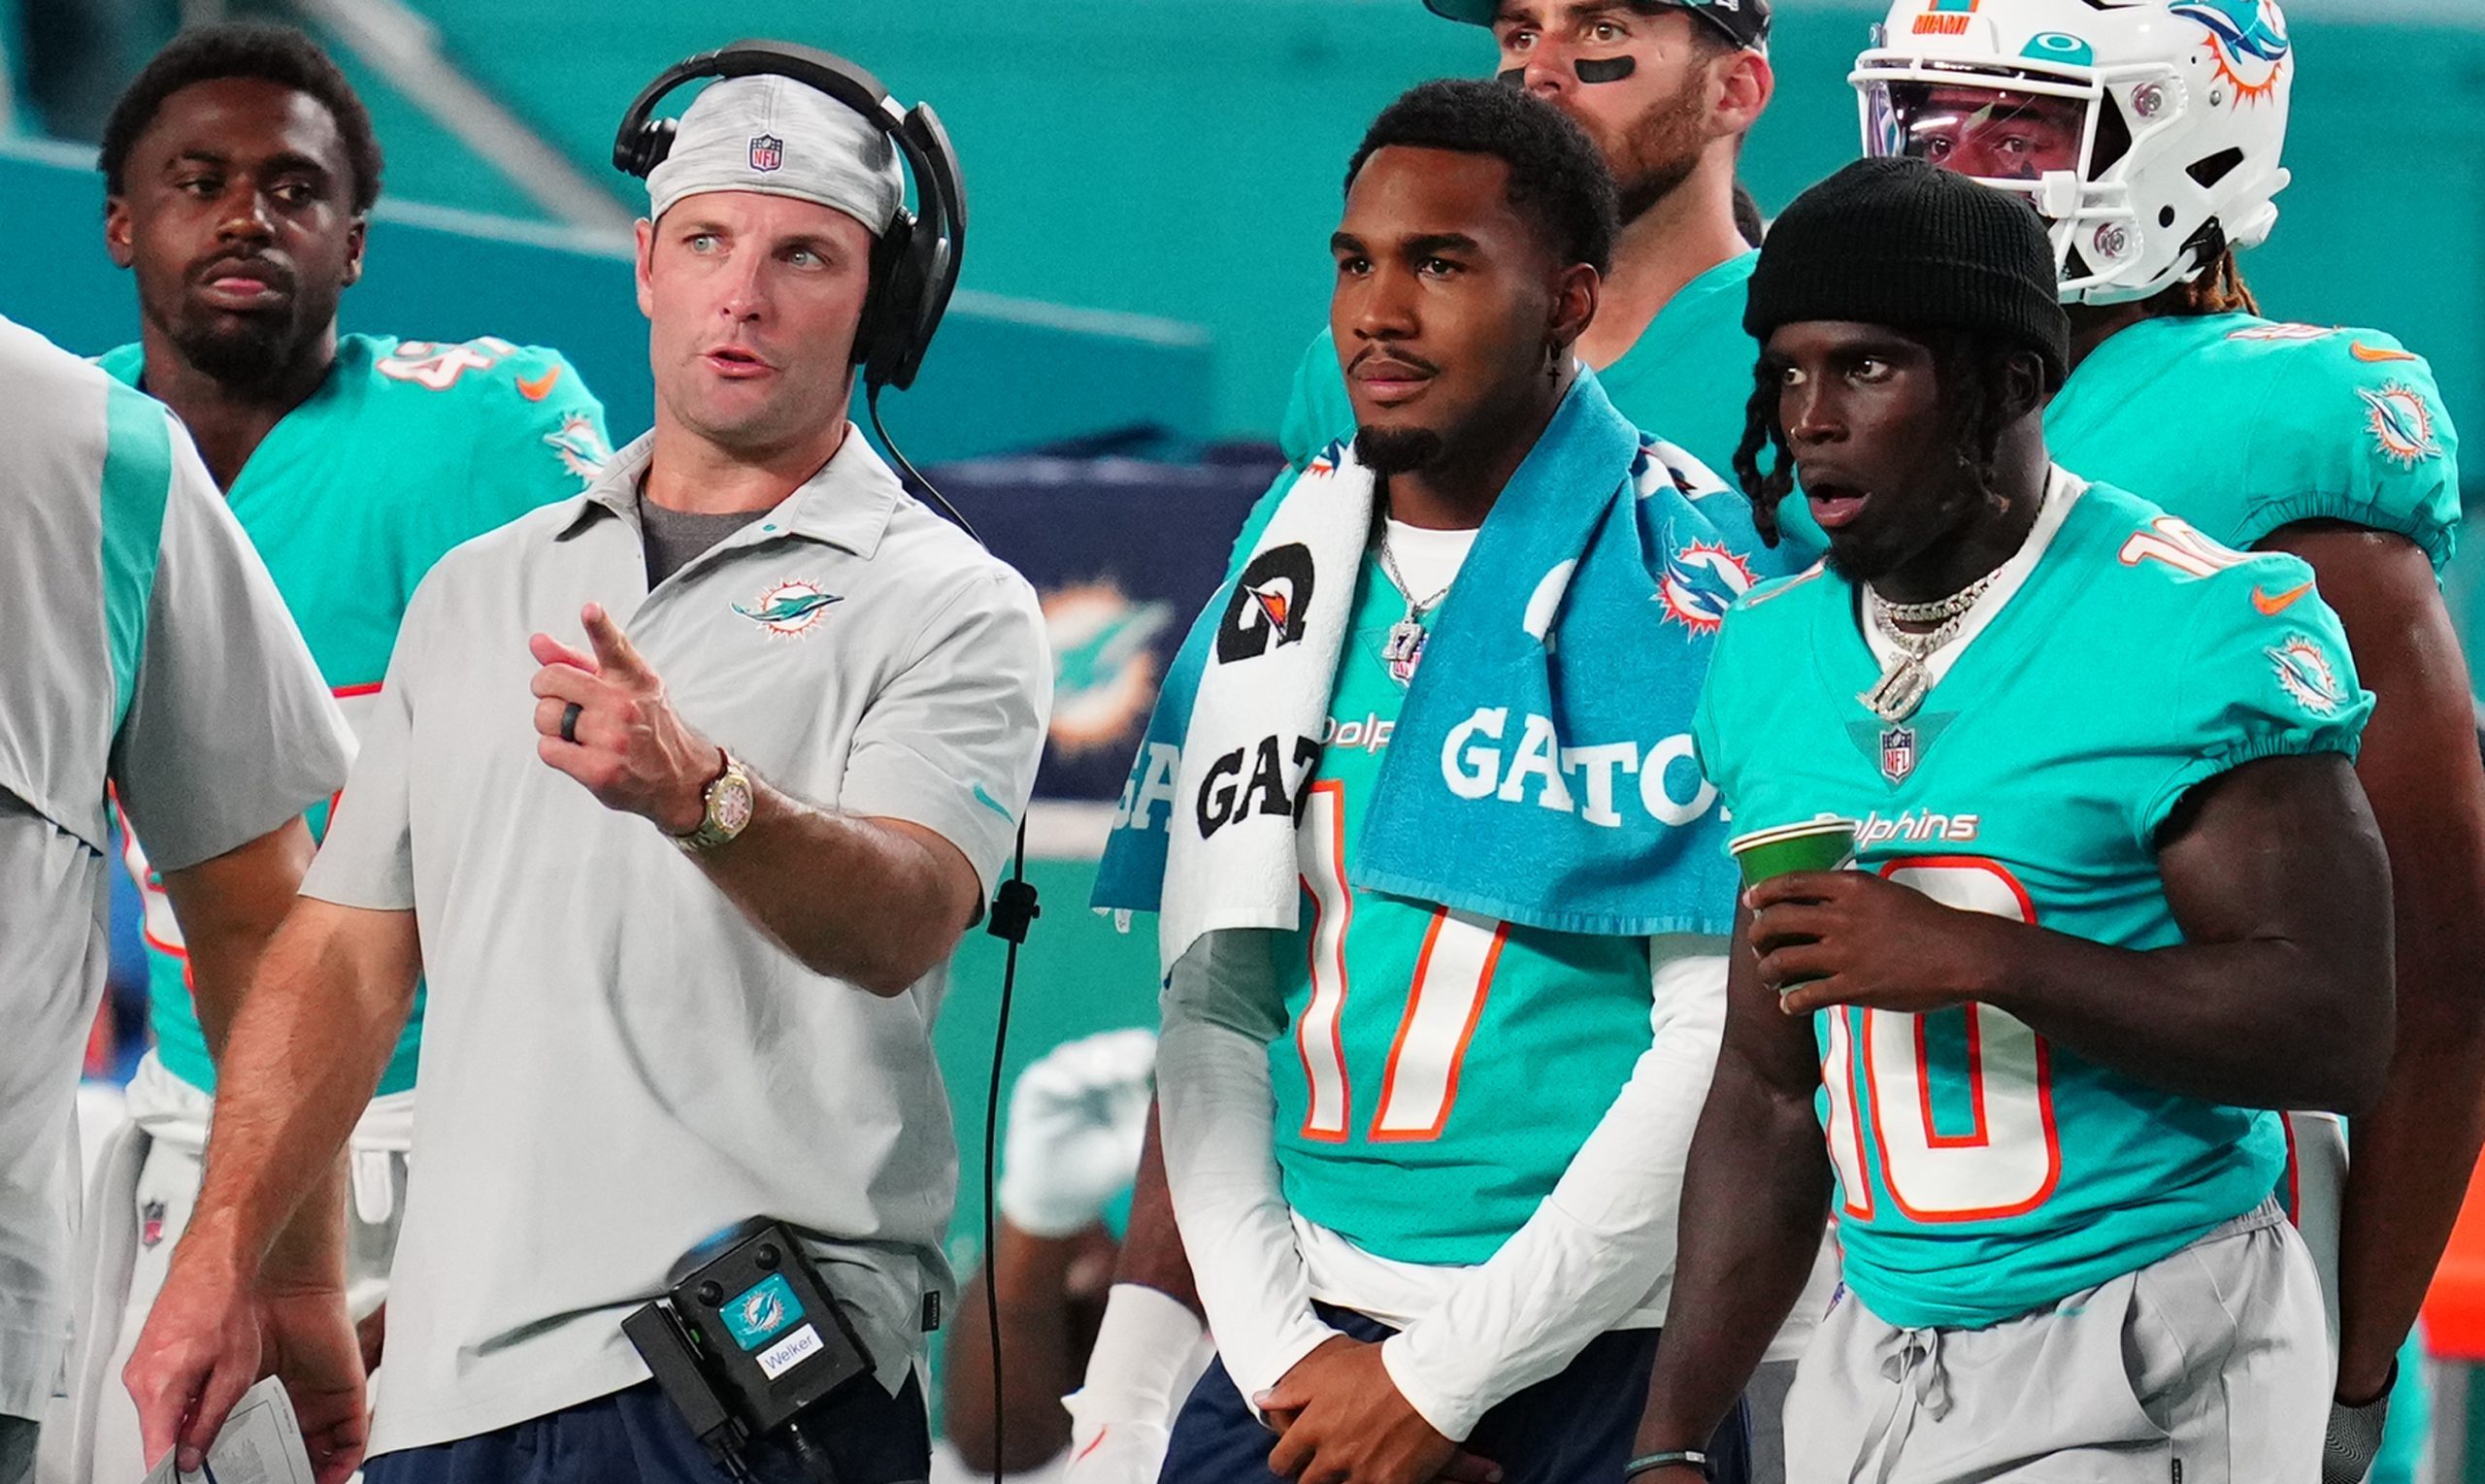 Miami Dolphins star wide receivers Jaylen Waddle and Tyreek Hill on the sideline.